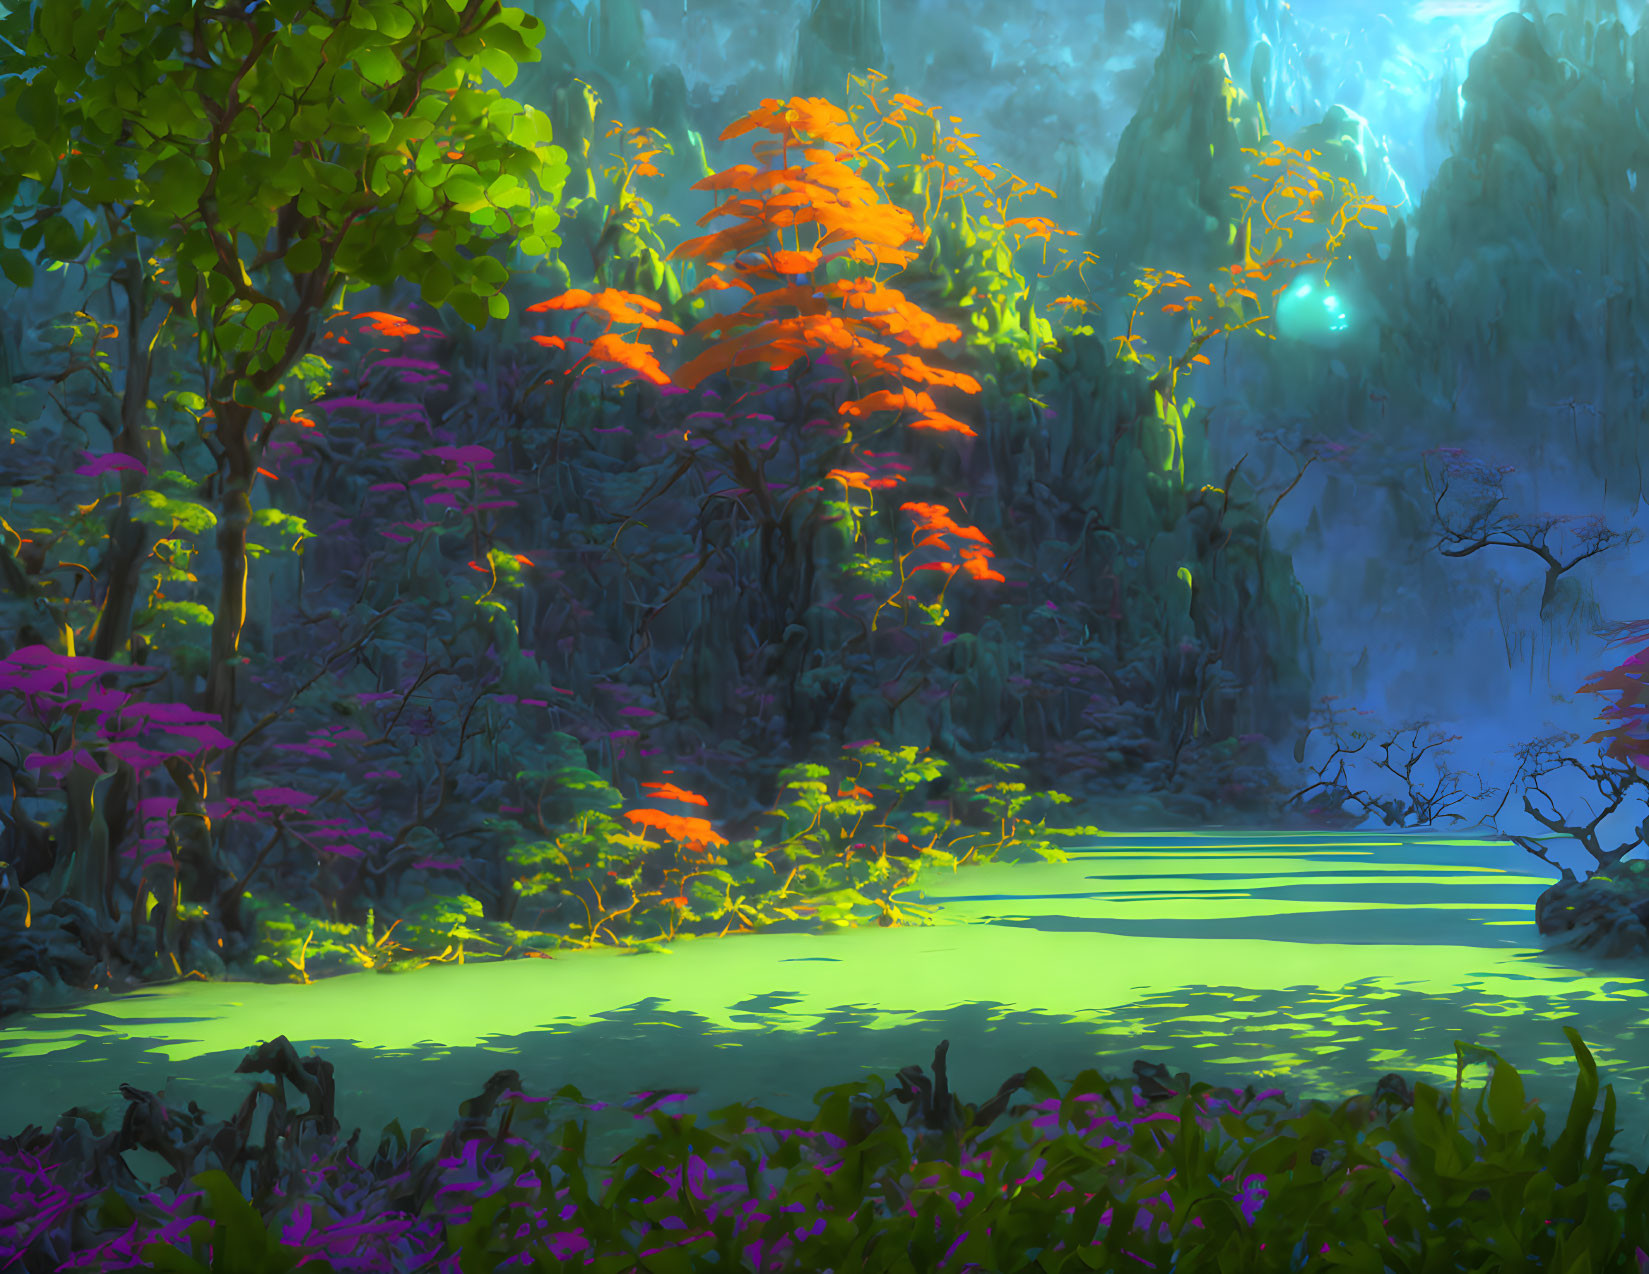 Luminescent forest with colorful foliage and glowing water